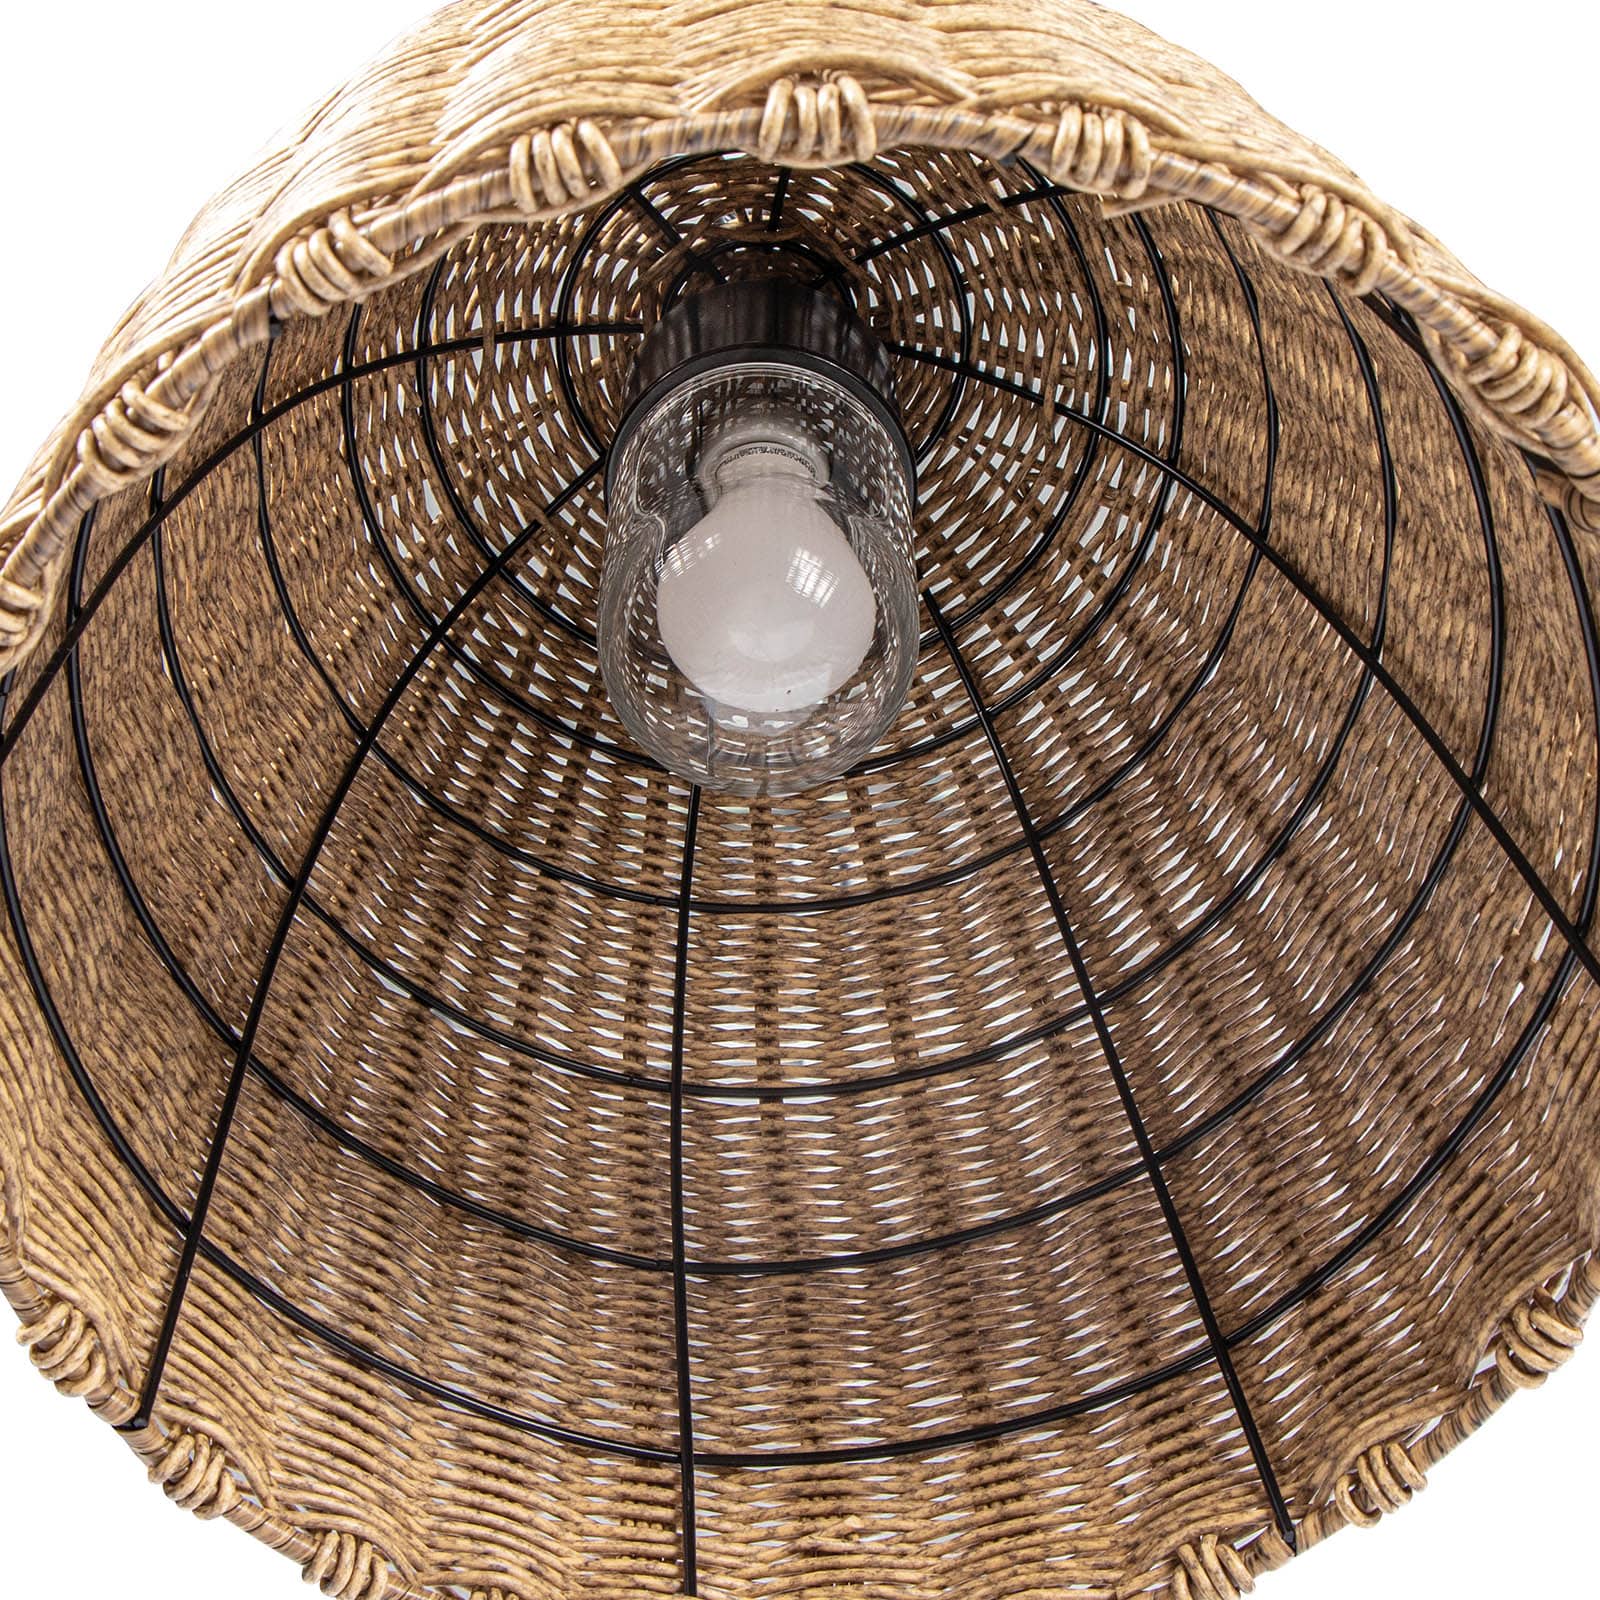 Beehive Outdoor Pendant Small in Weathered Natural by Coastal Living